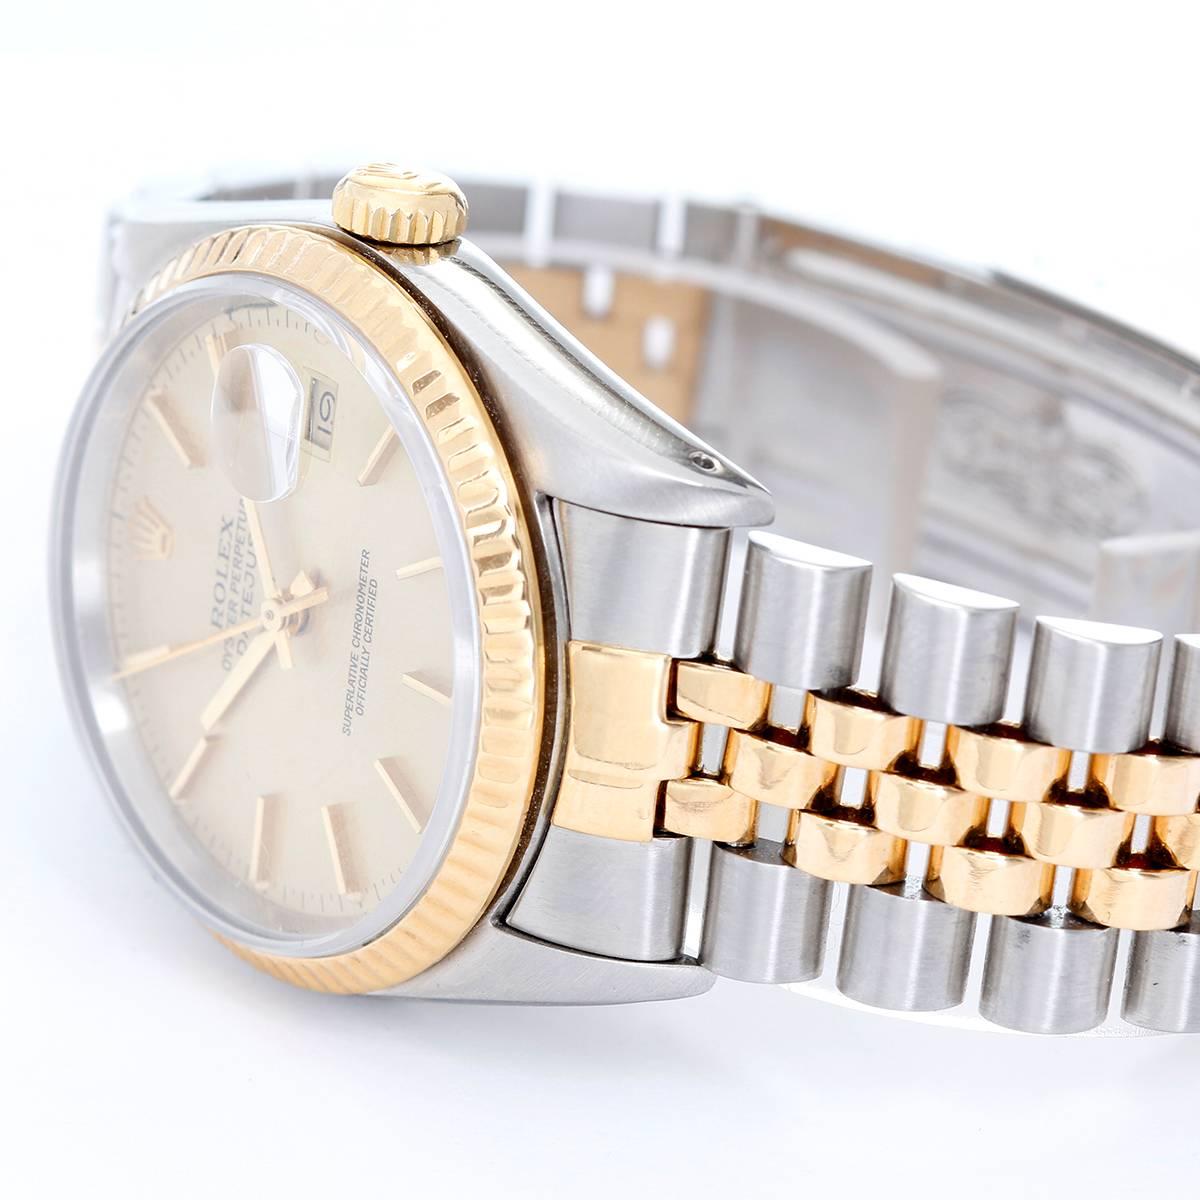 Rolex Datejust 2-Tone Watch  Jubilee Band 16233 -  Automatic winding, Quickset, sapphire crystal. Stainless steel case with 18k yellow gold fluted bezel (36mm diameter). Champagne dial with stick markers. Stainless steel and 18k yellow gold Jubilee